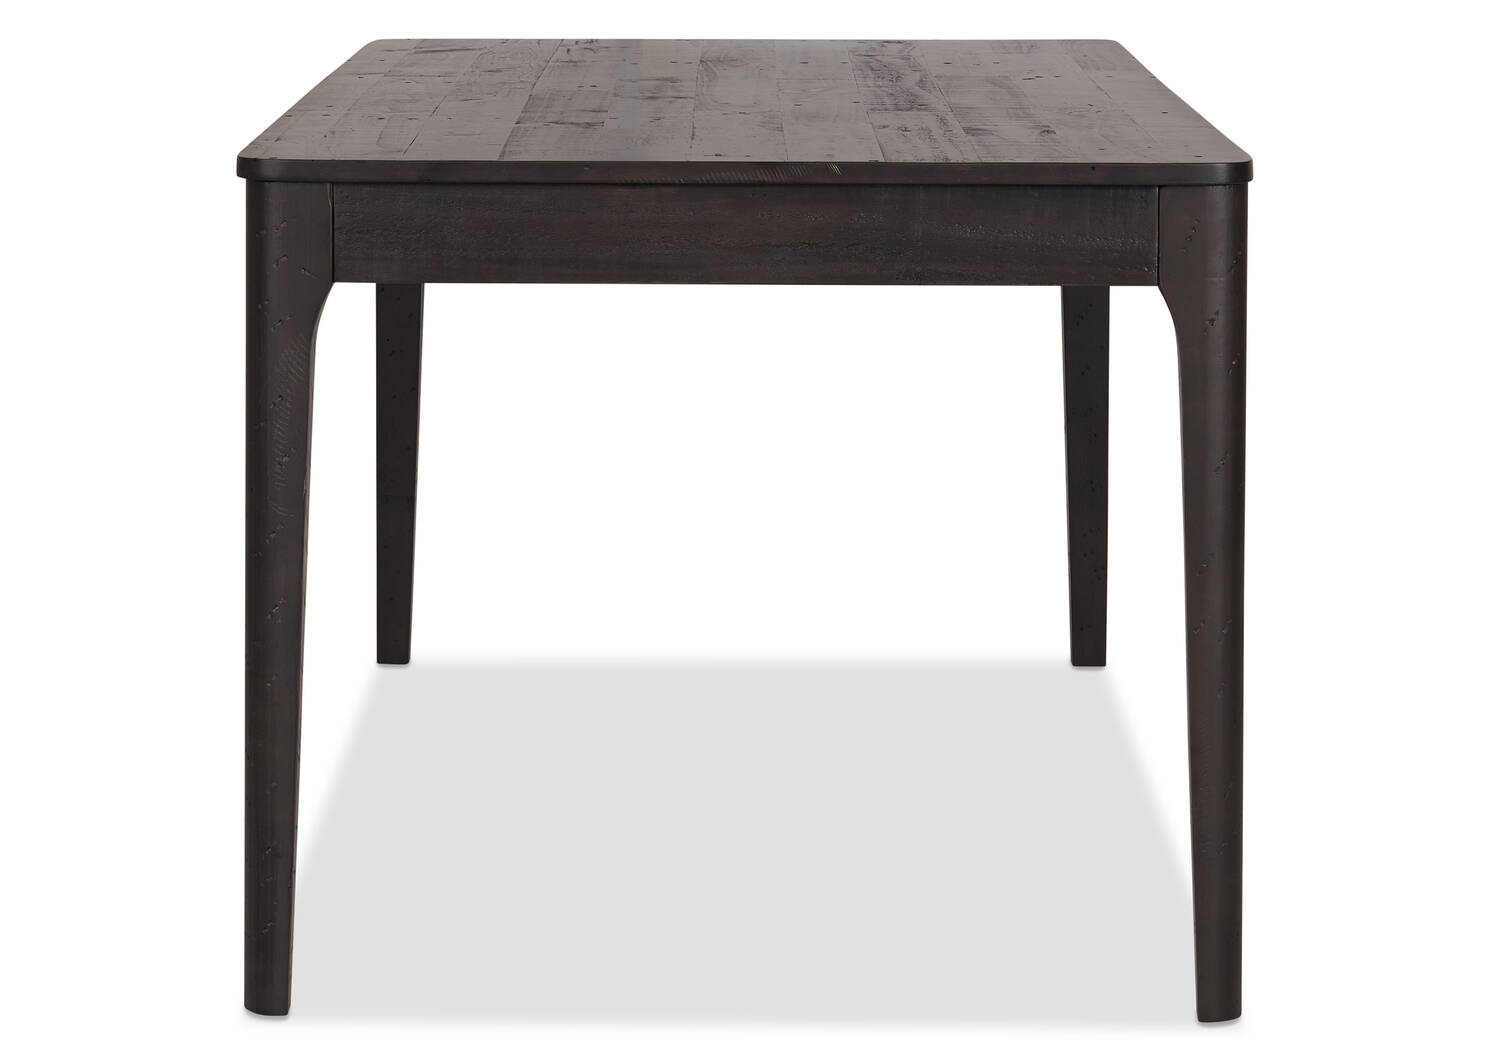 Goodwin Dining Table -Fernie Charcoal